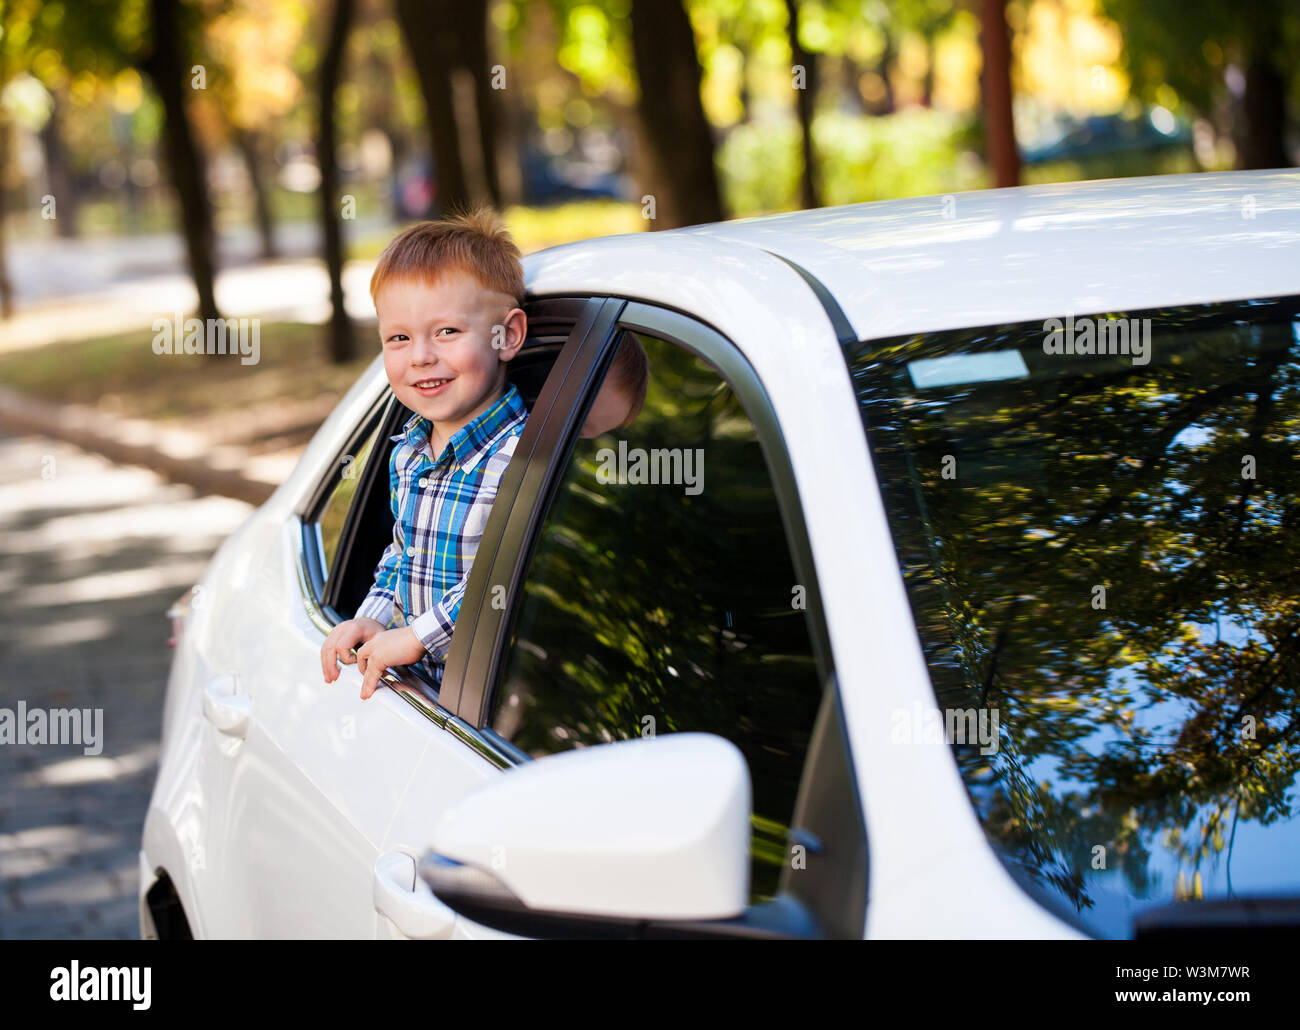 Adorable baby boy in the car. Laughing boy looks out of the car window. Stock Photo